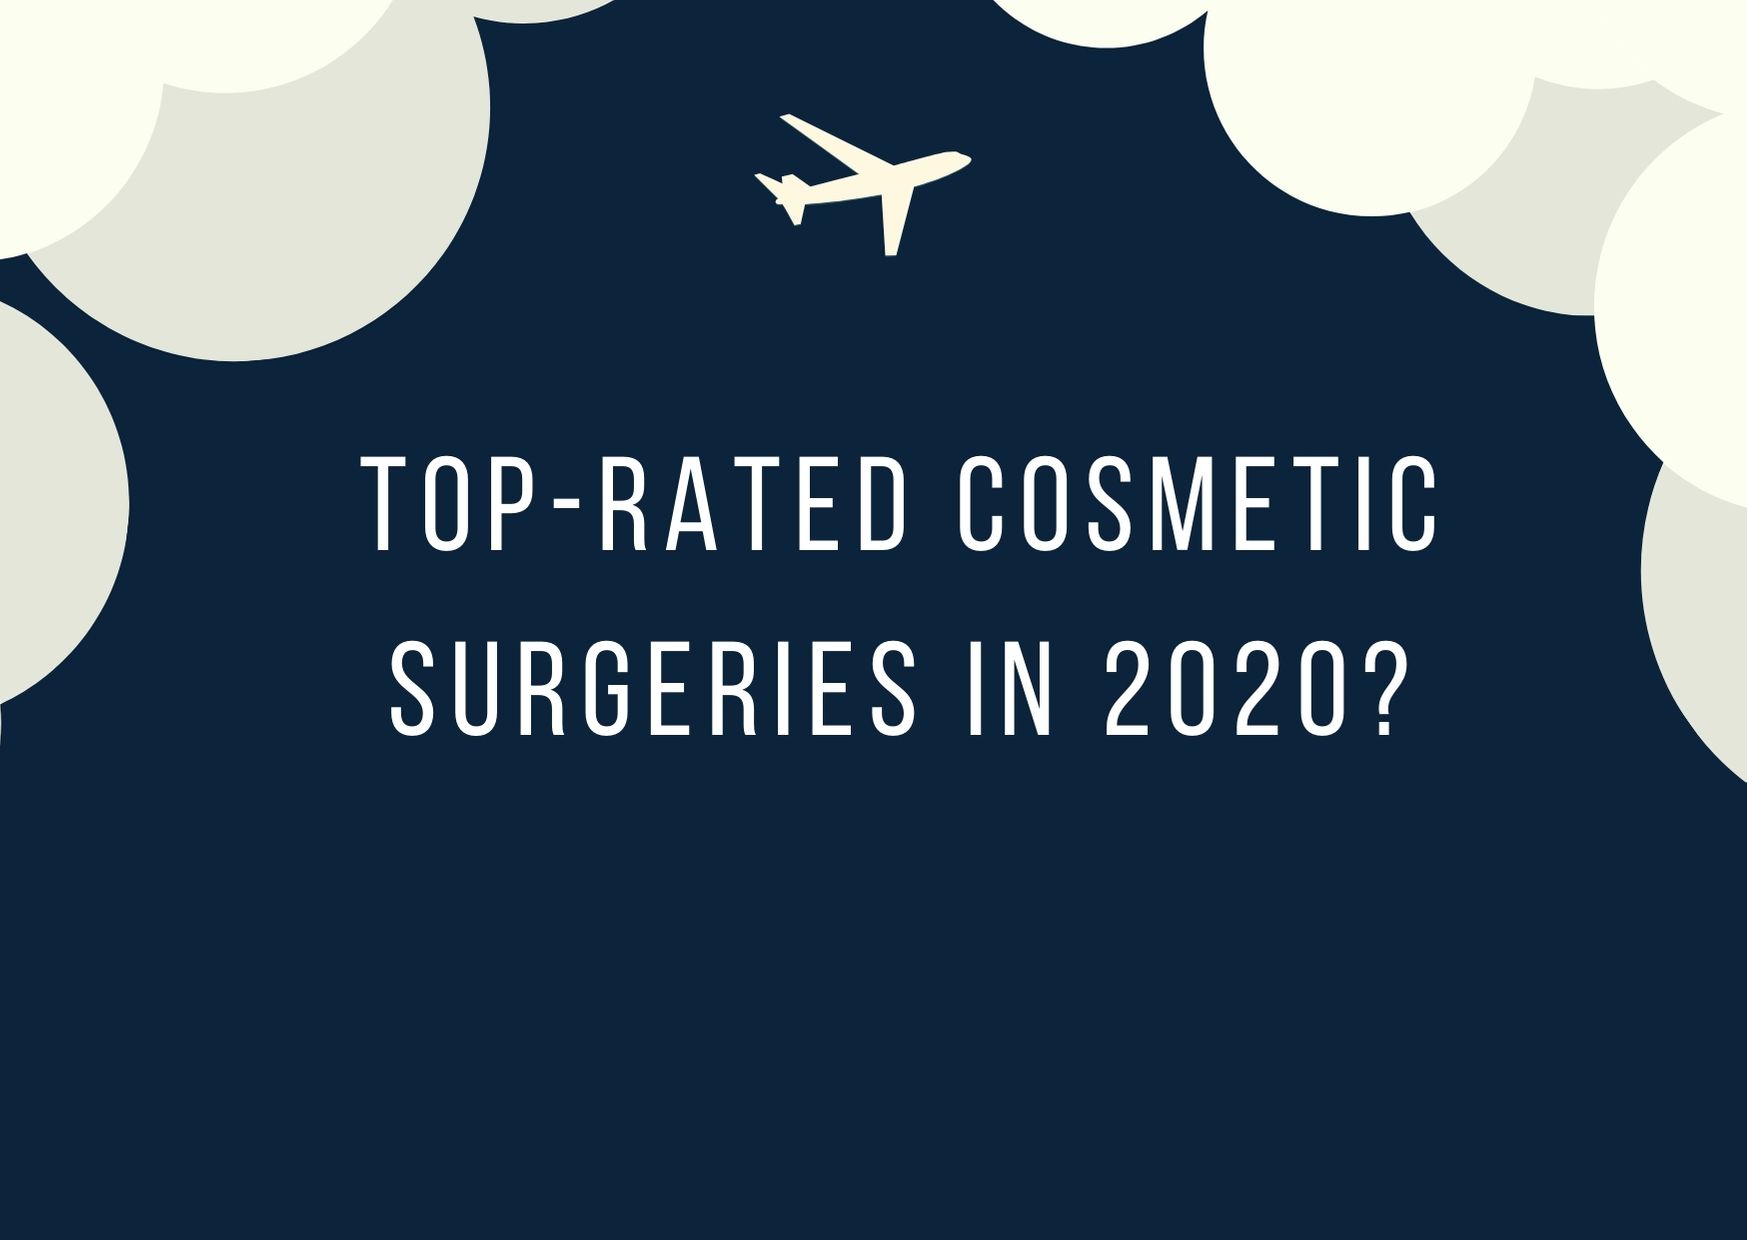 Top-Rated Cosmetic Surgeries in 2020?